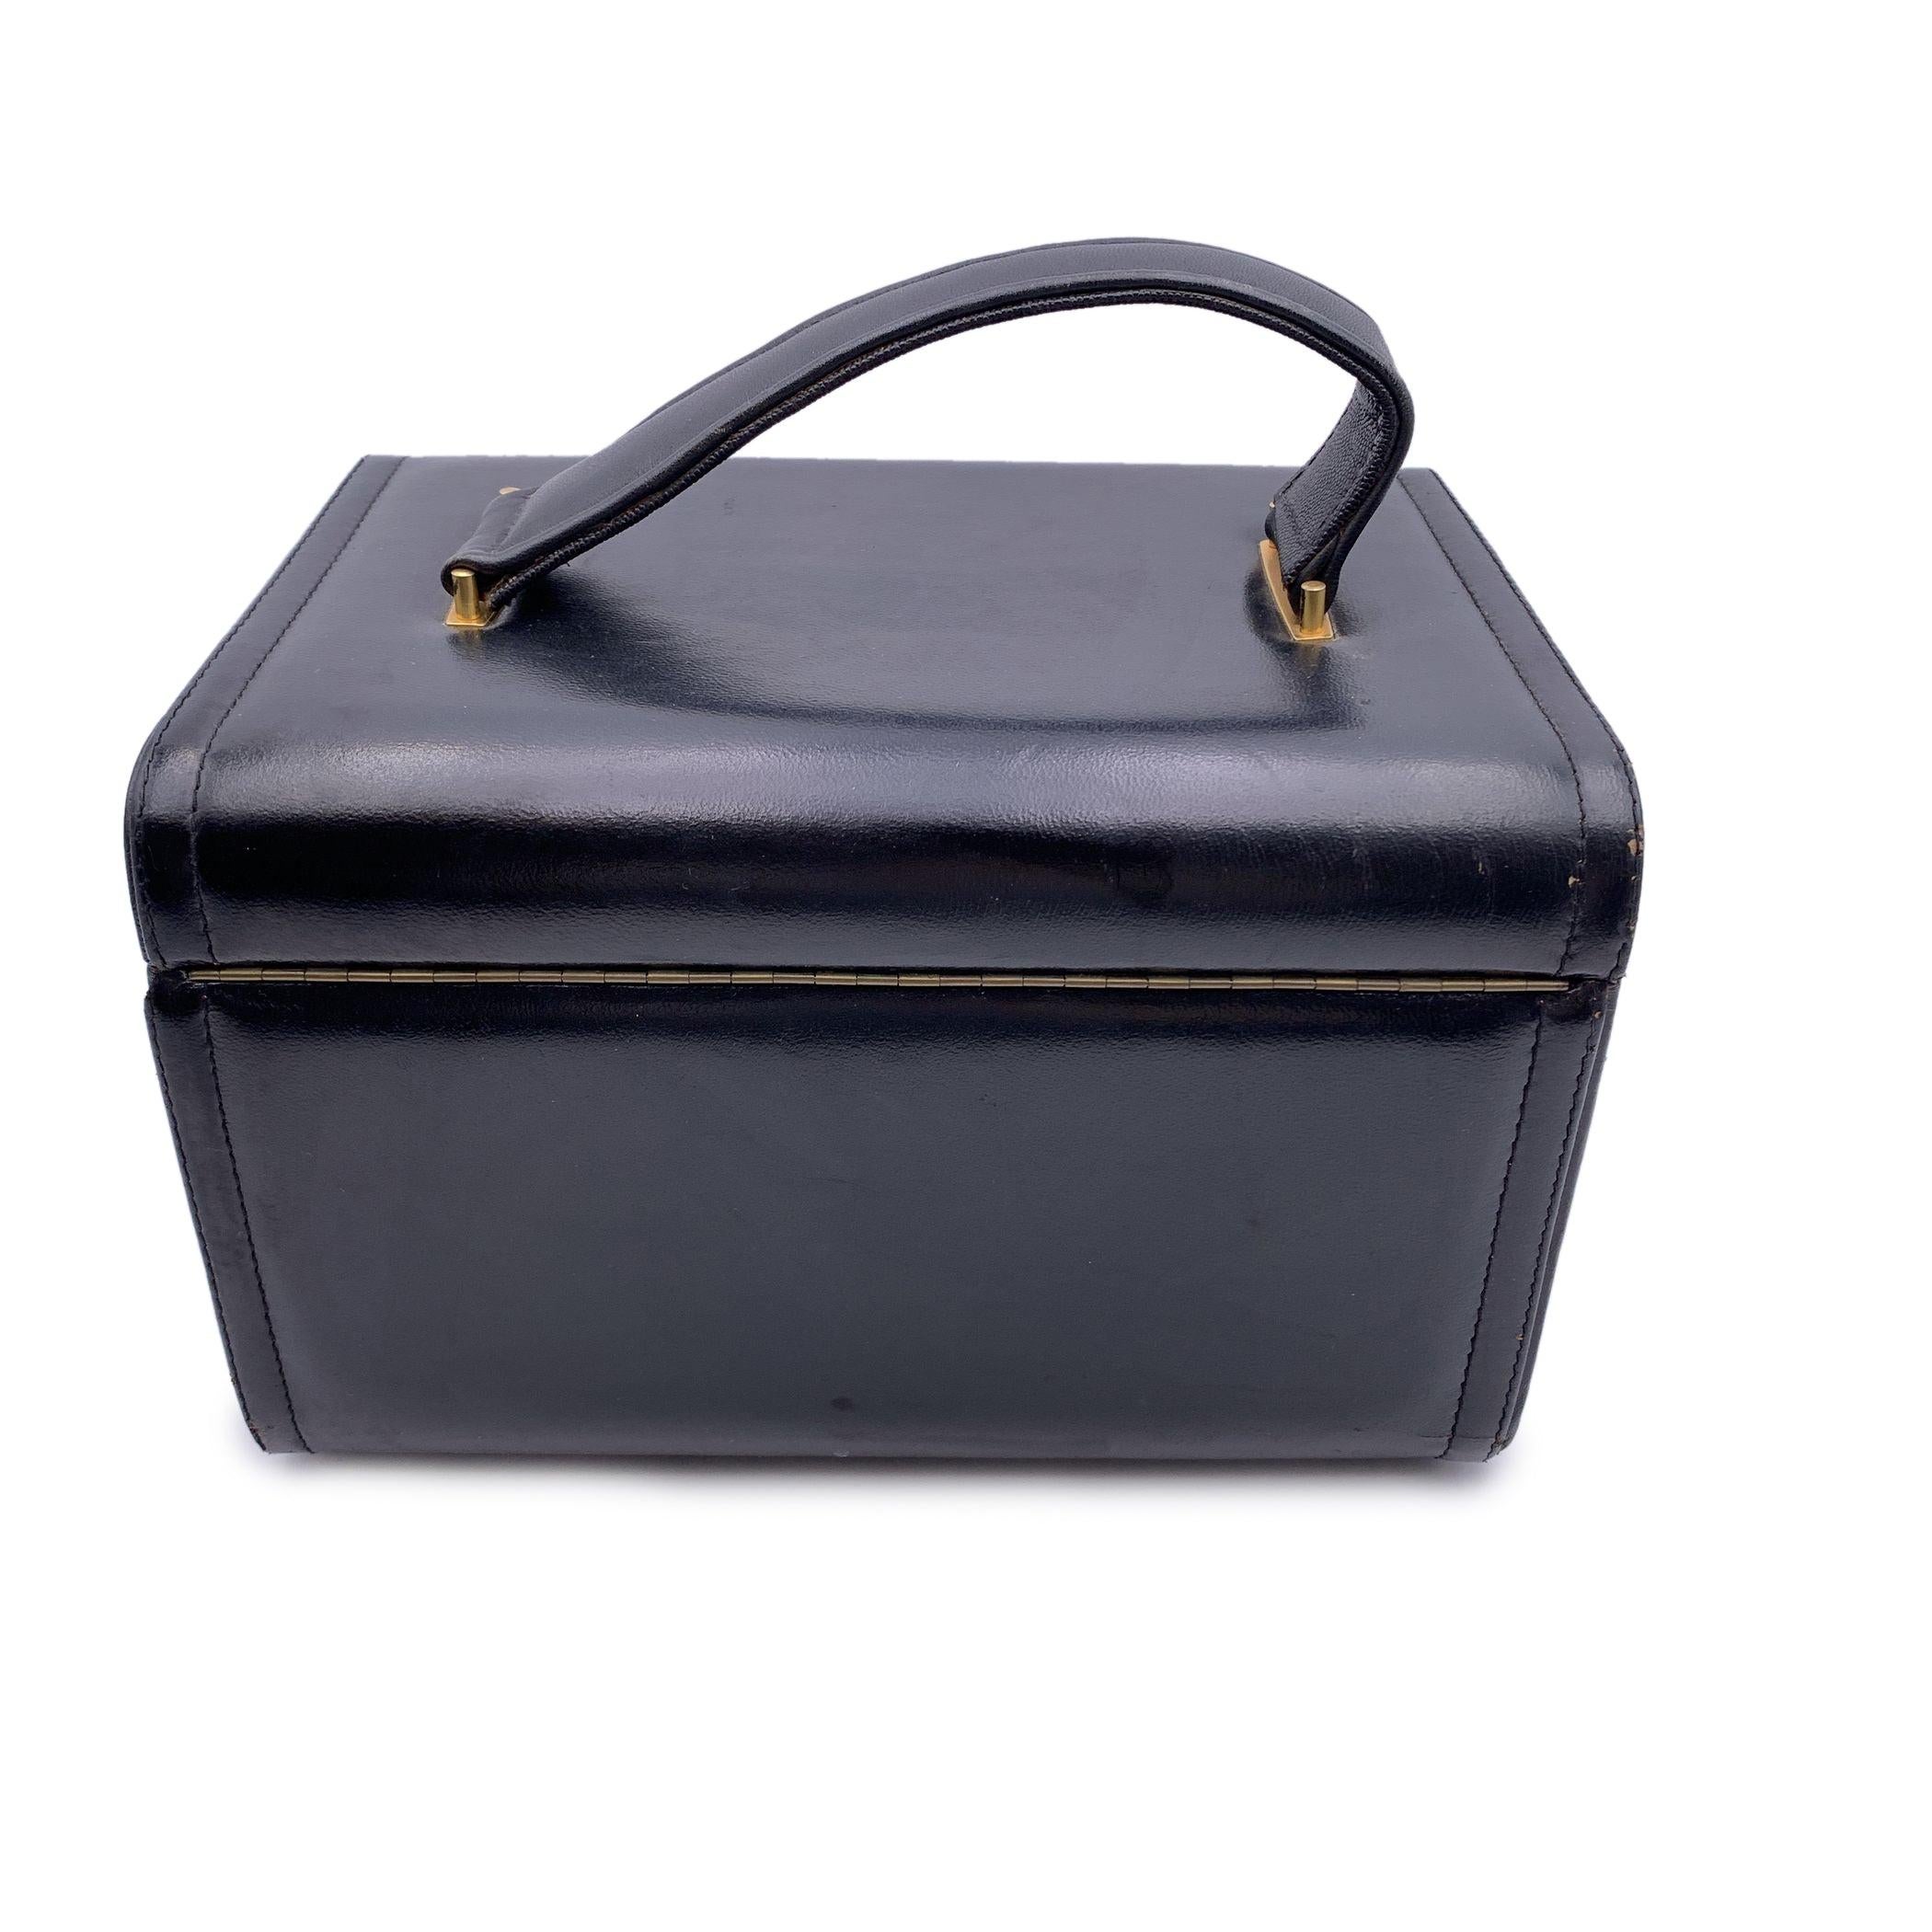 Vintage Black Leather Travel Train Case Beauty Vanity Bag In Good Condition For Sale In Rome, Rome